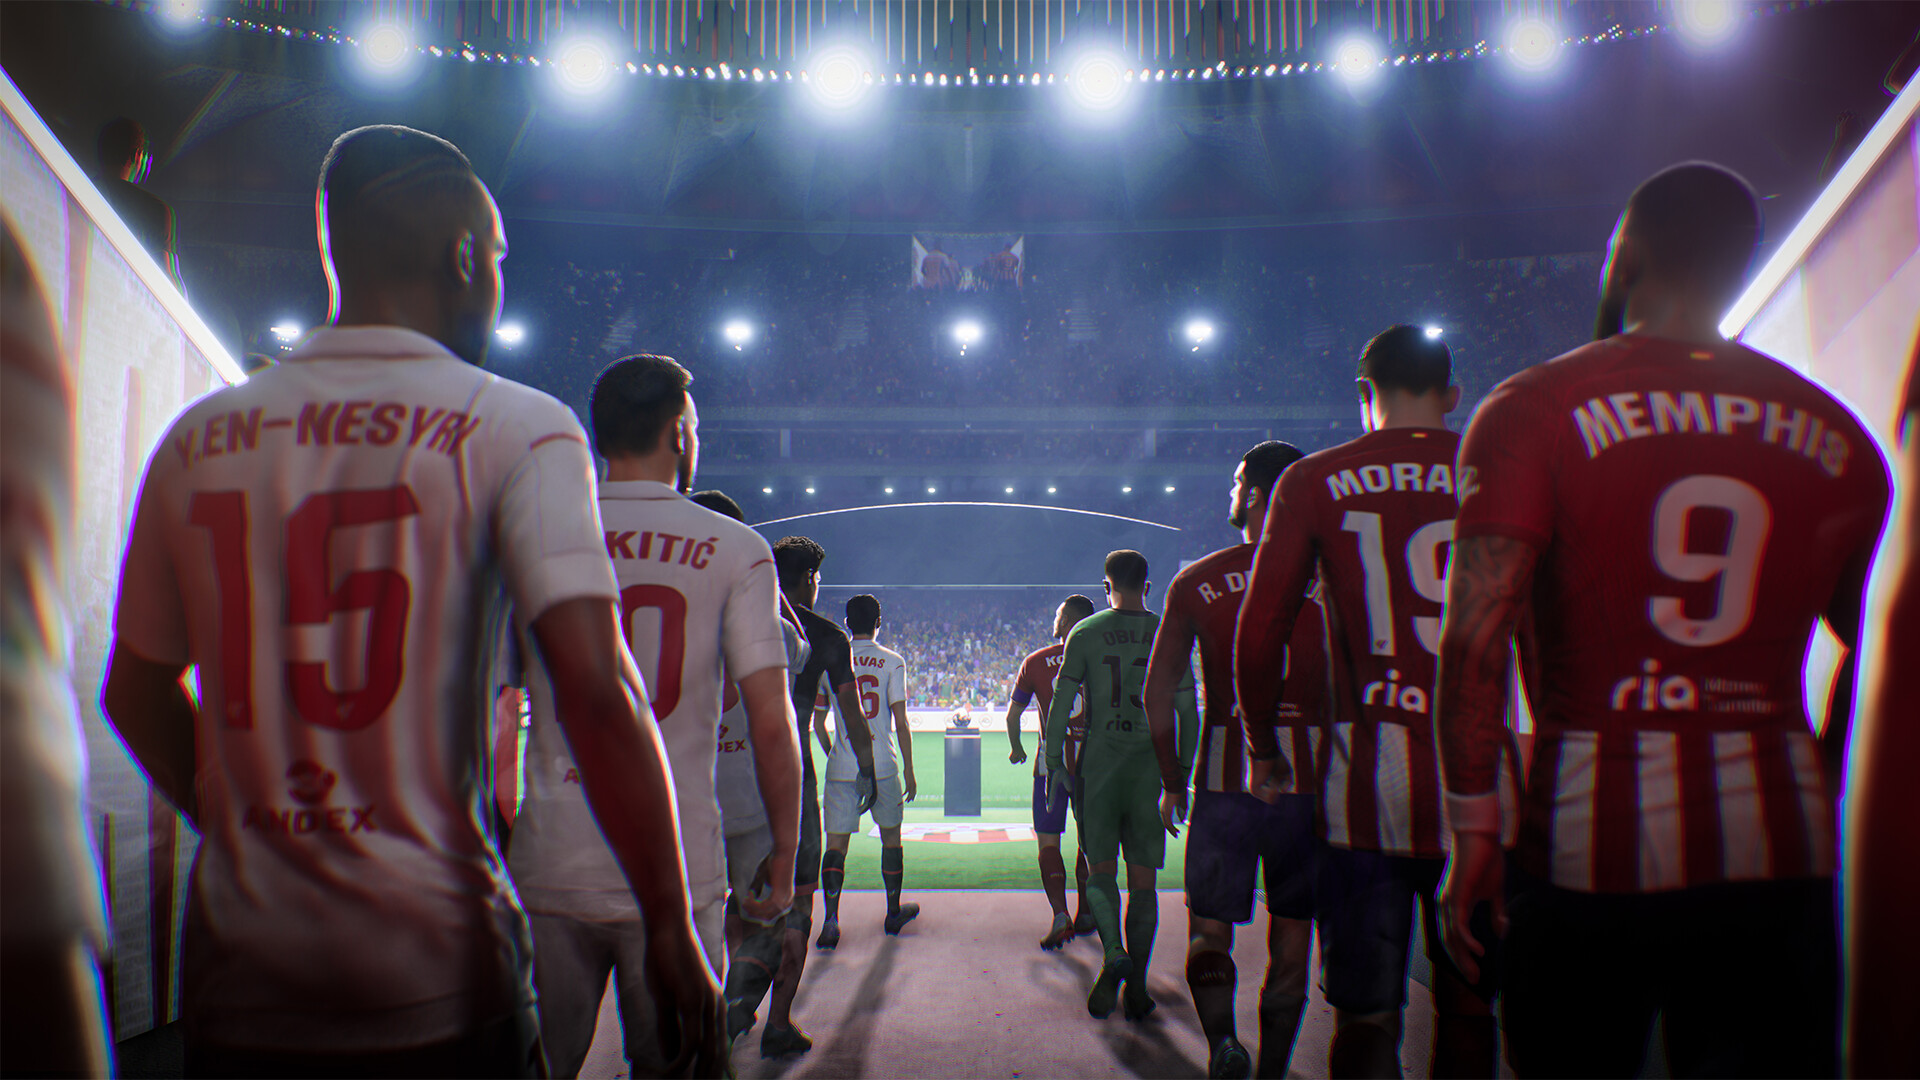 EA SPORTS FC™ 24 (Xbox One) key - price from $15.10